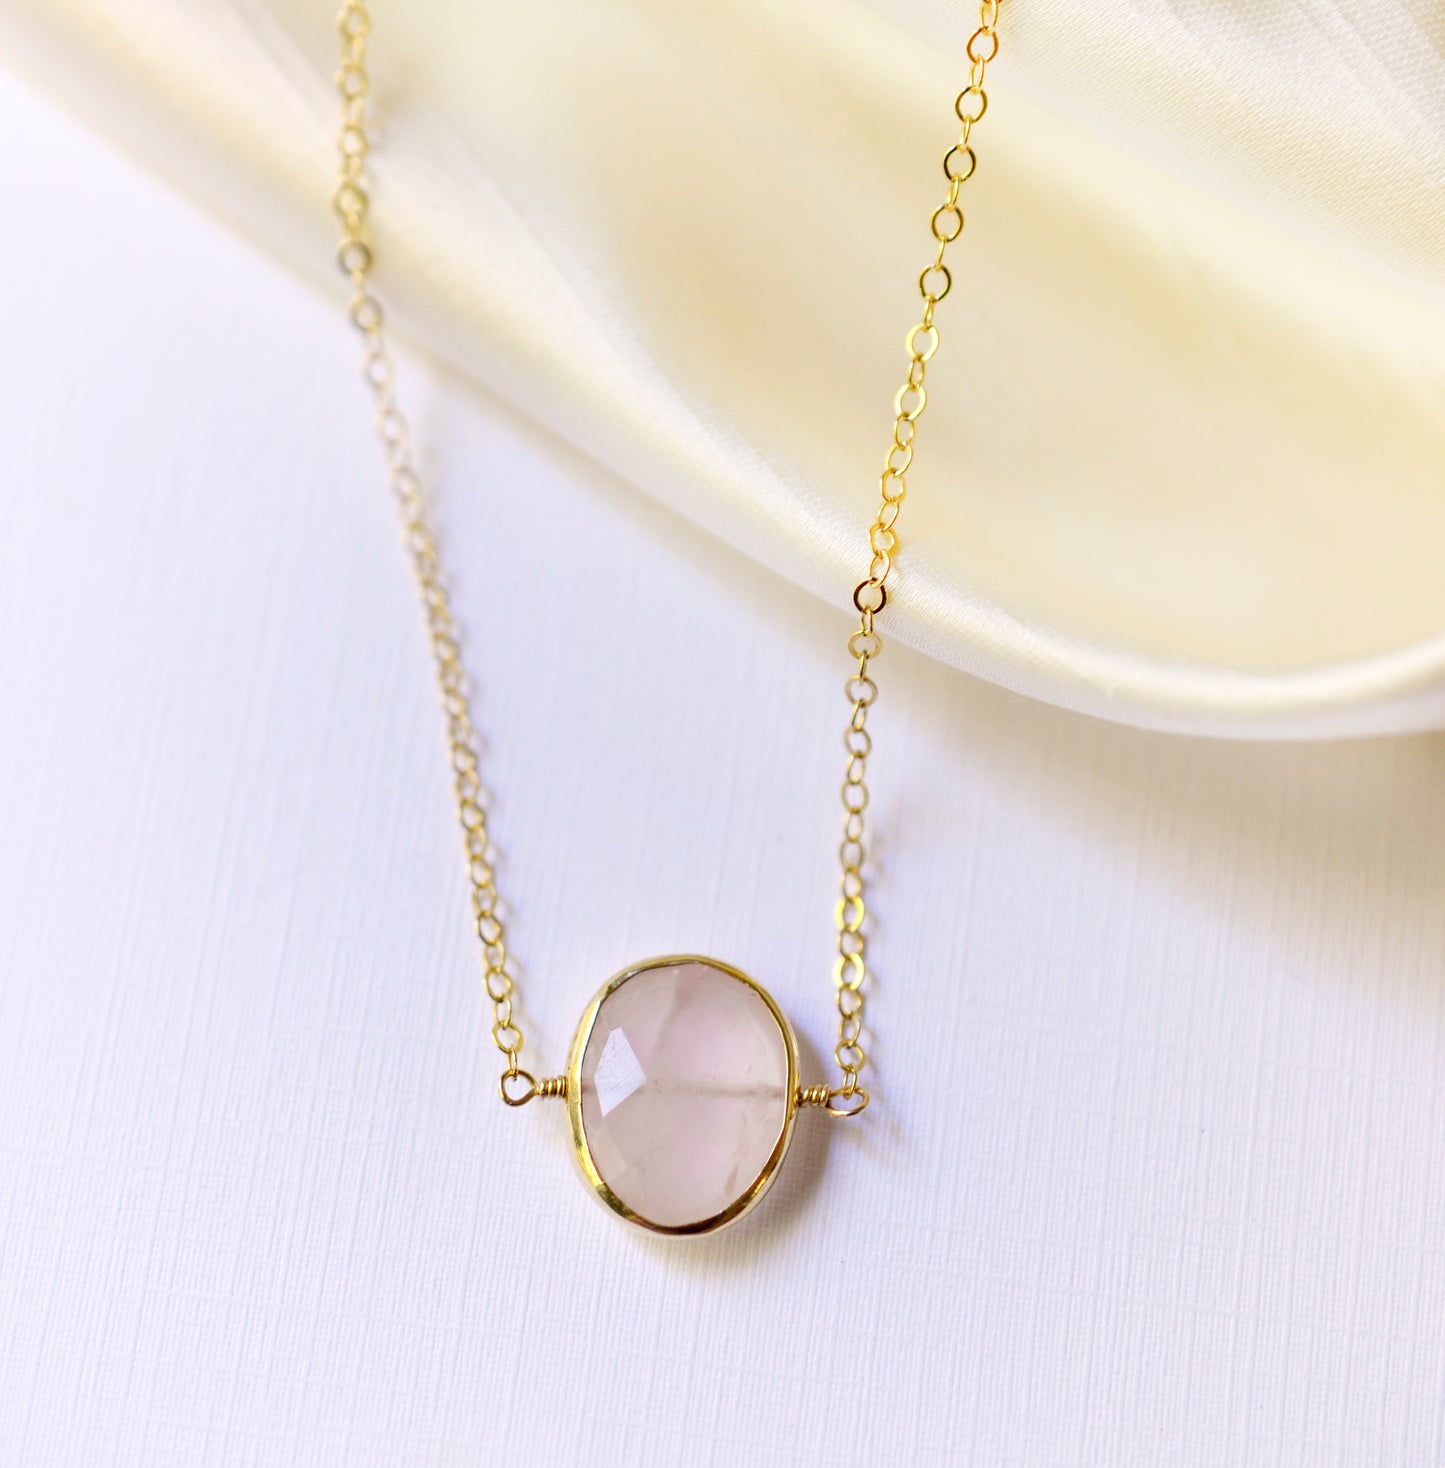 Delicate pink Rose Quartz oval coin shaped pendant with gold bezel. Chain is 14k Gold Filled.